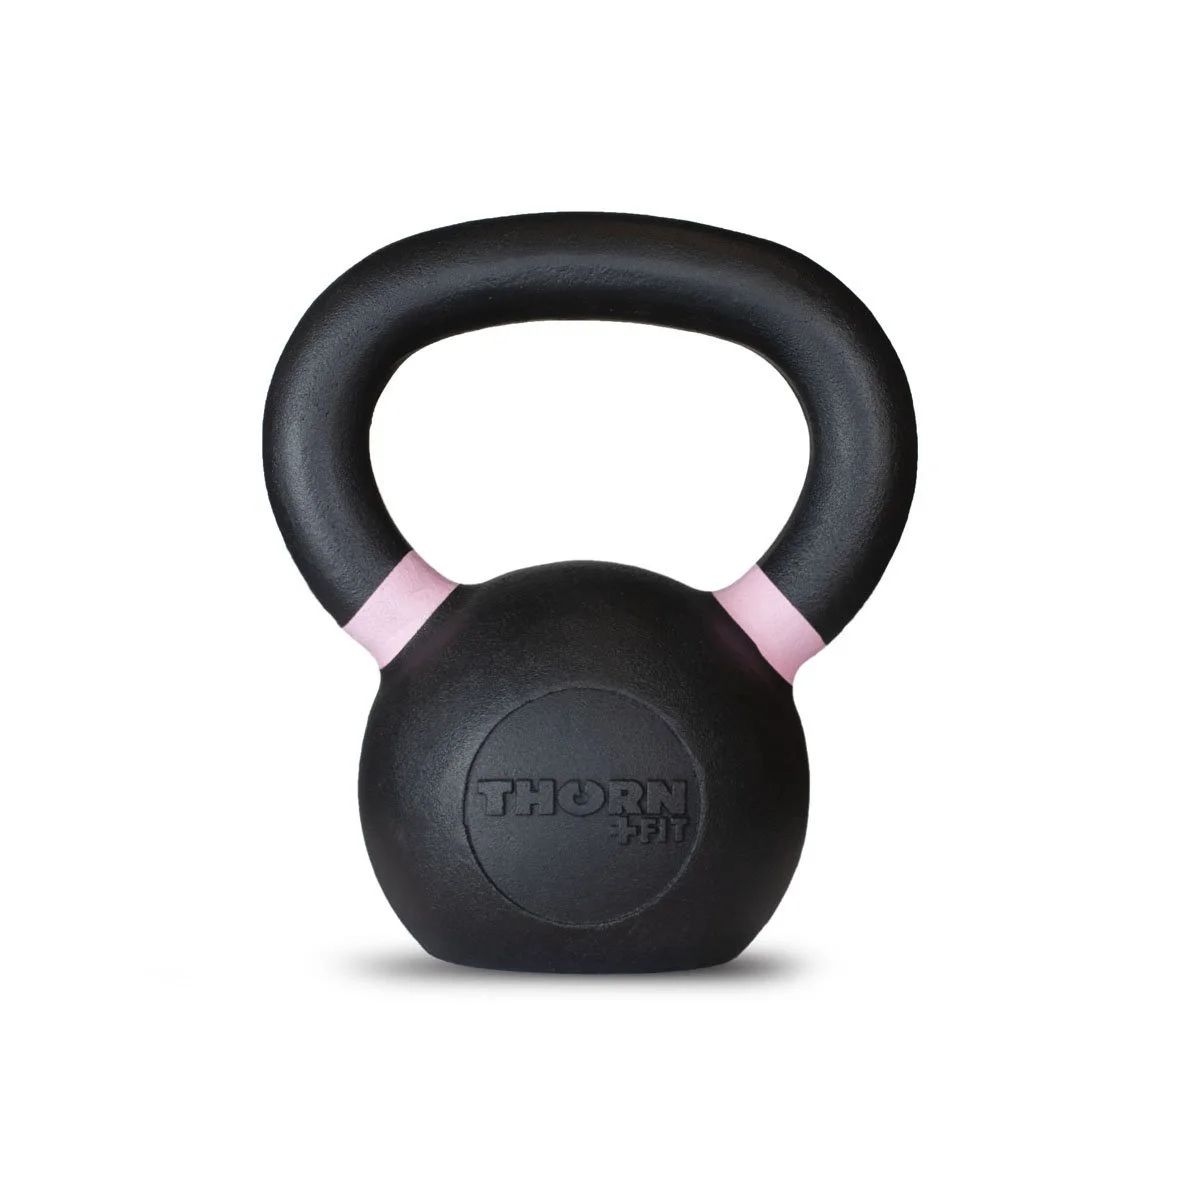 THORN FIT Hantel CC 2.0 Color coded Kettlebell 8kg